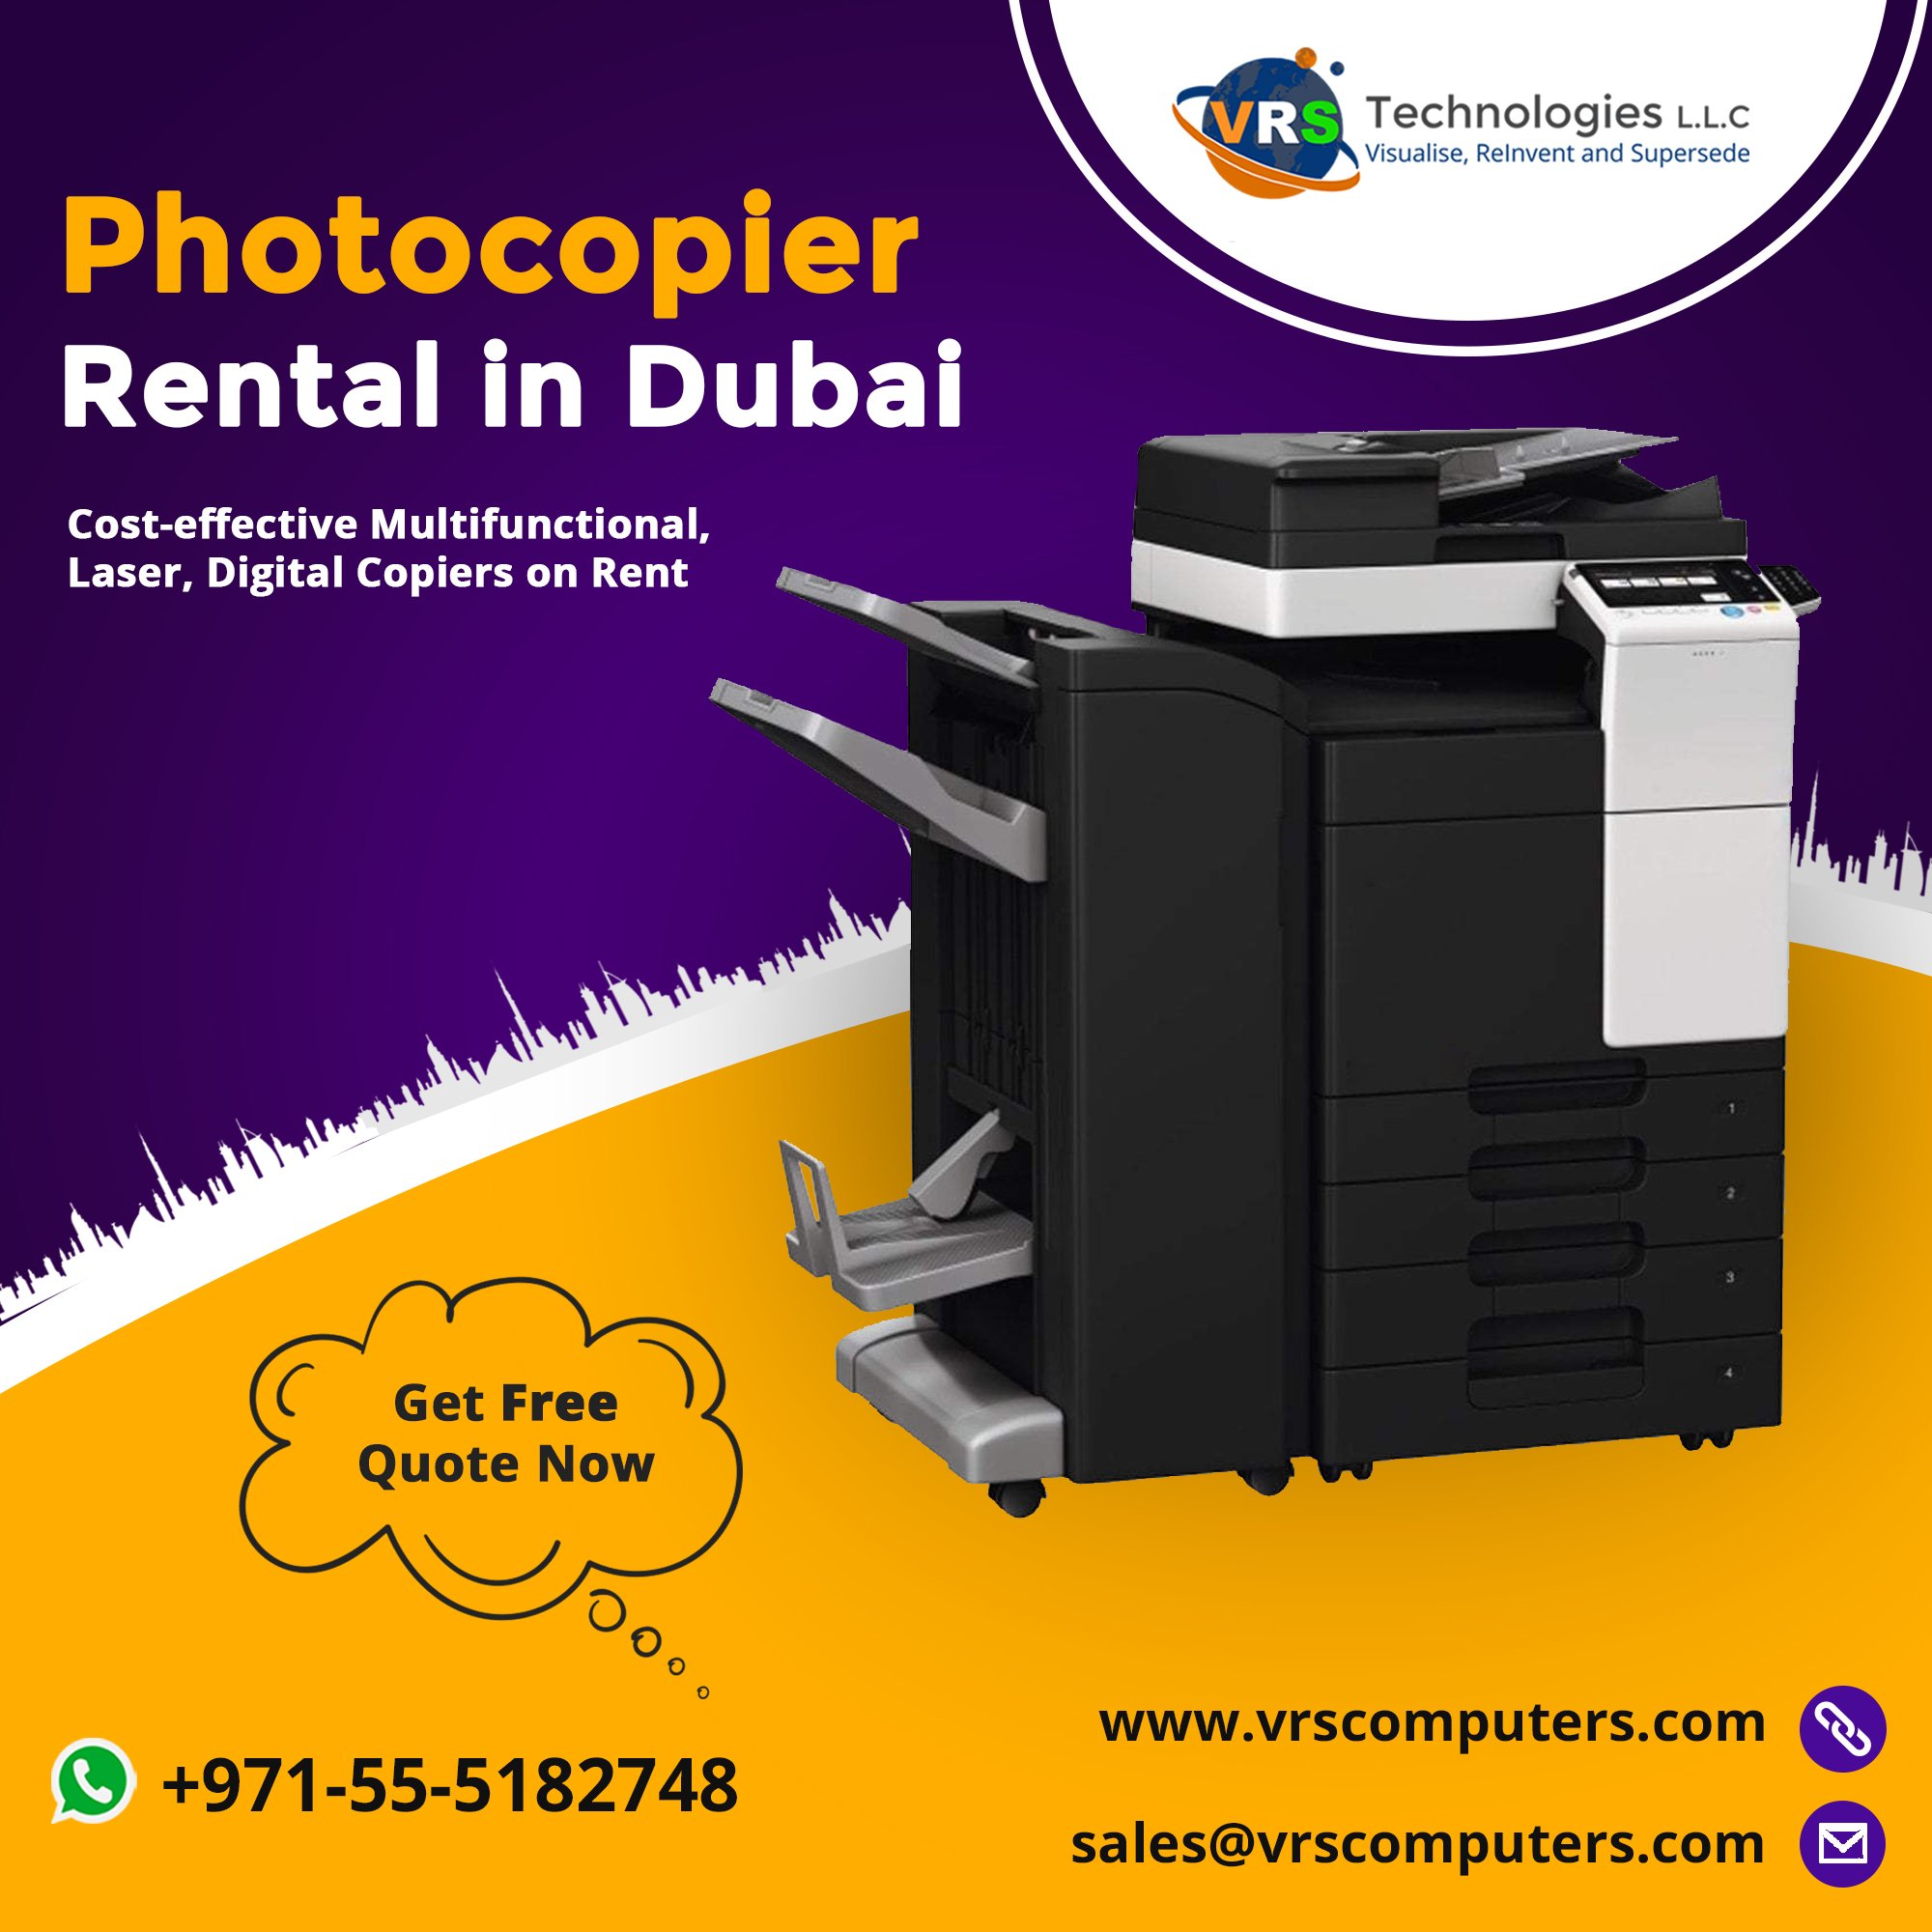 How Photocopier Rental Can Help You Improve Your Business In Dubai